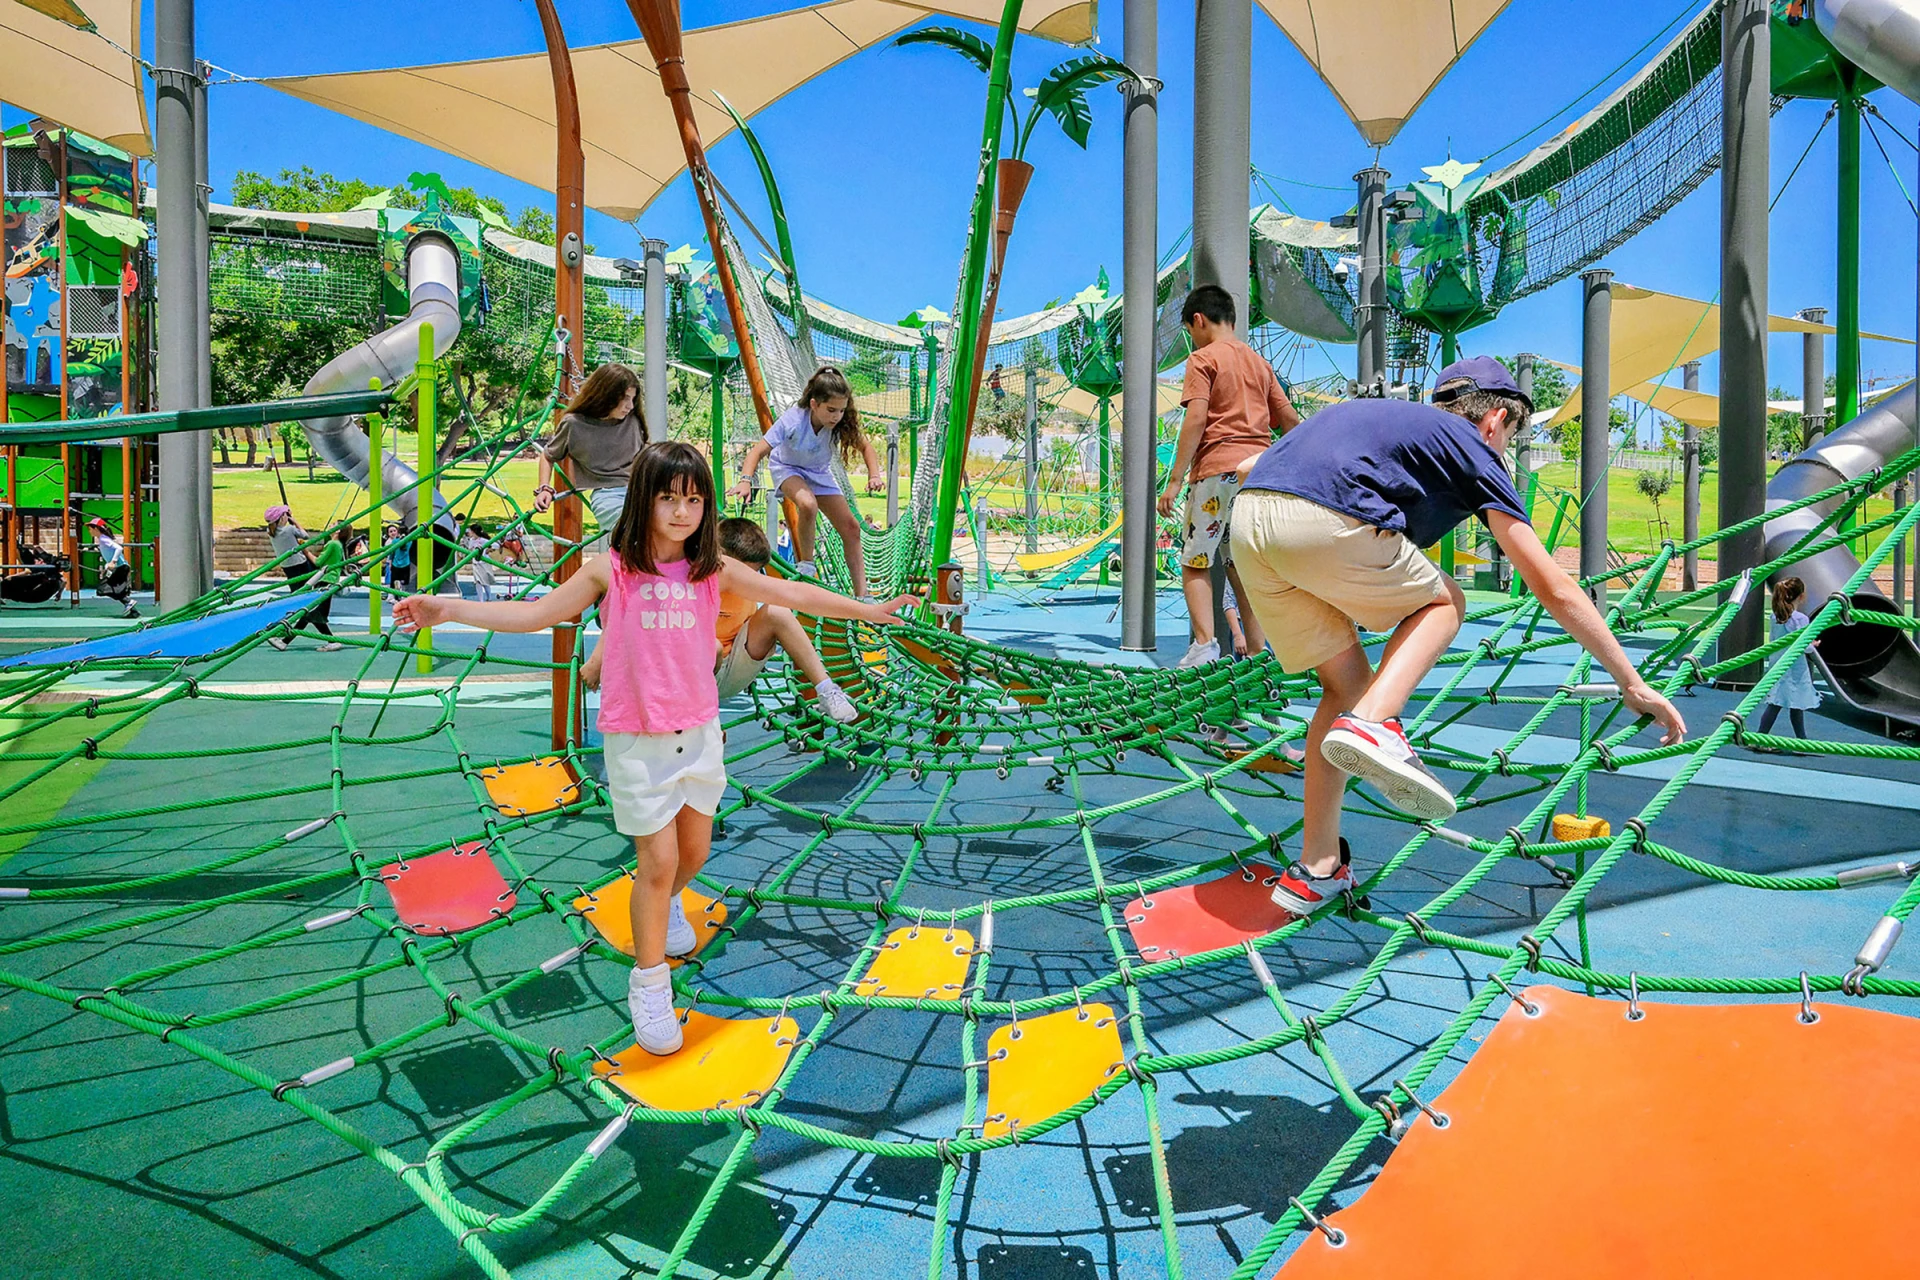 Children walking across a rope net play structure